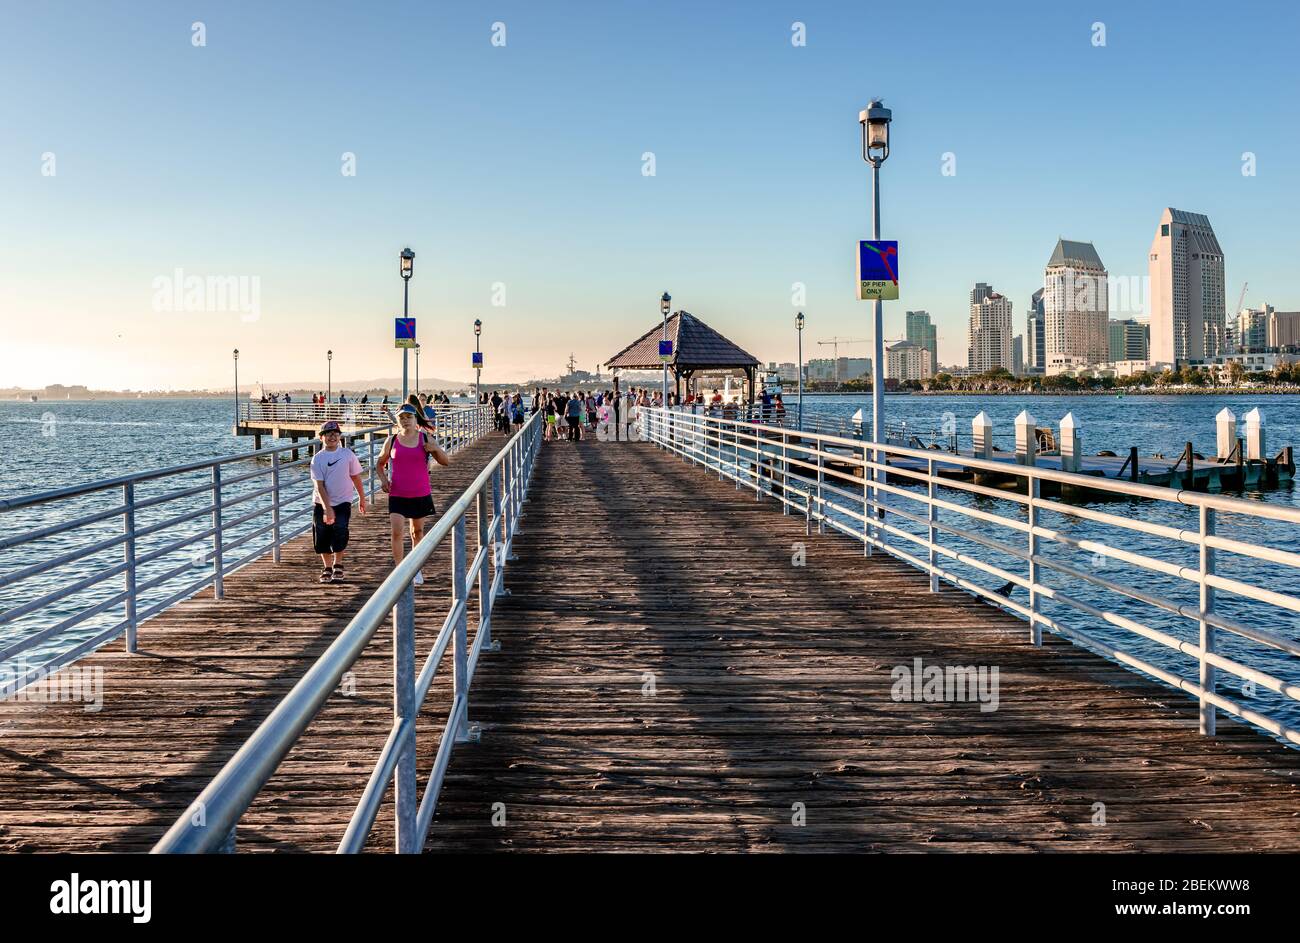 Coronado Ferry Landing in the afternoon. Passengers wait for the ferry that will carry them to San Diego. The San Diego skyline is on the right. Stock Photo